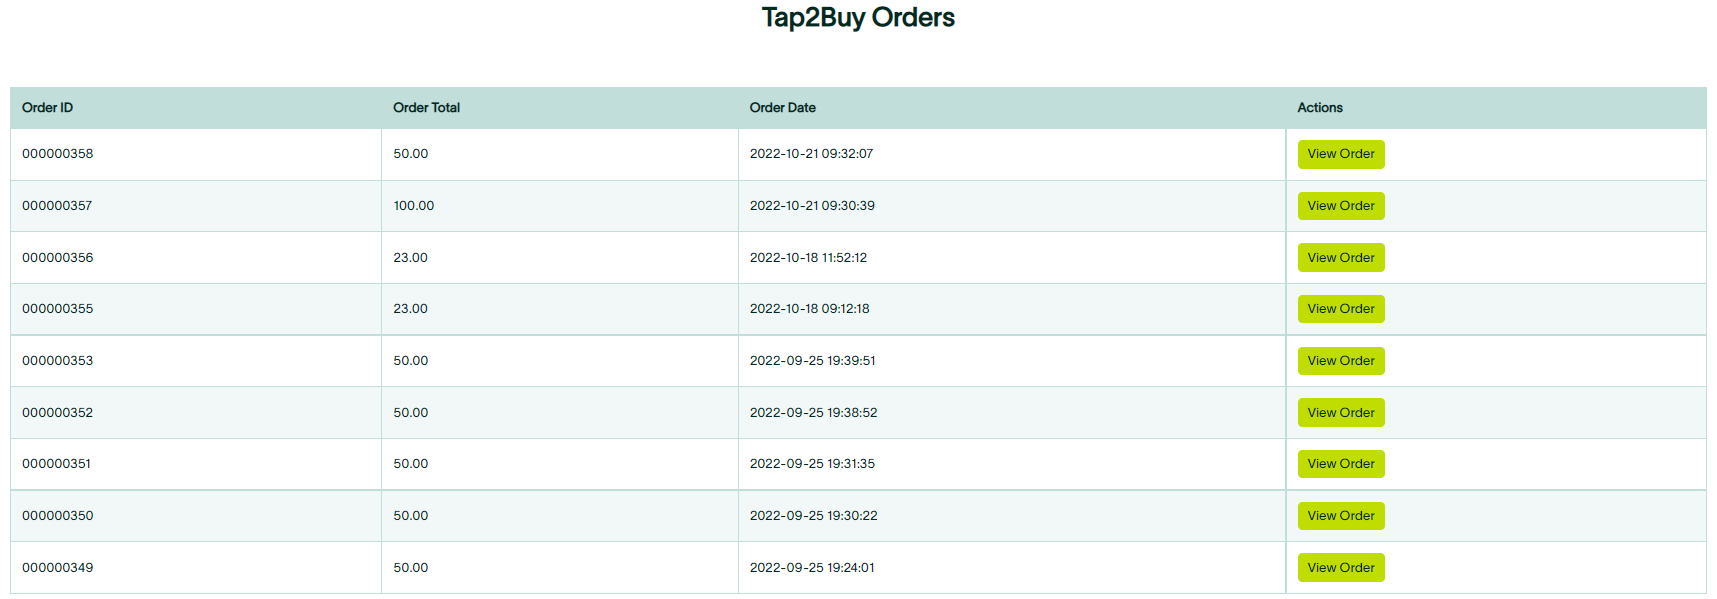 tap2buy_order_summary.png